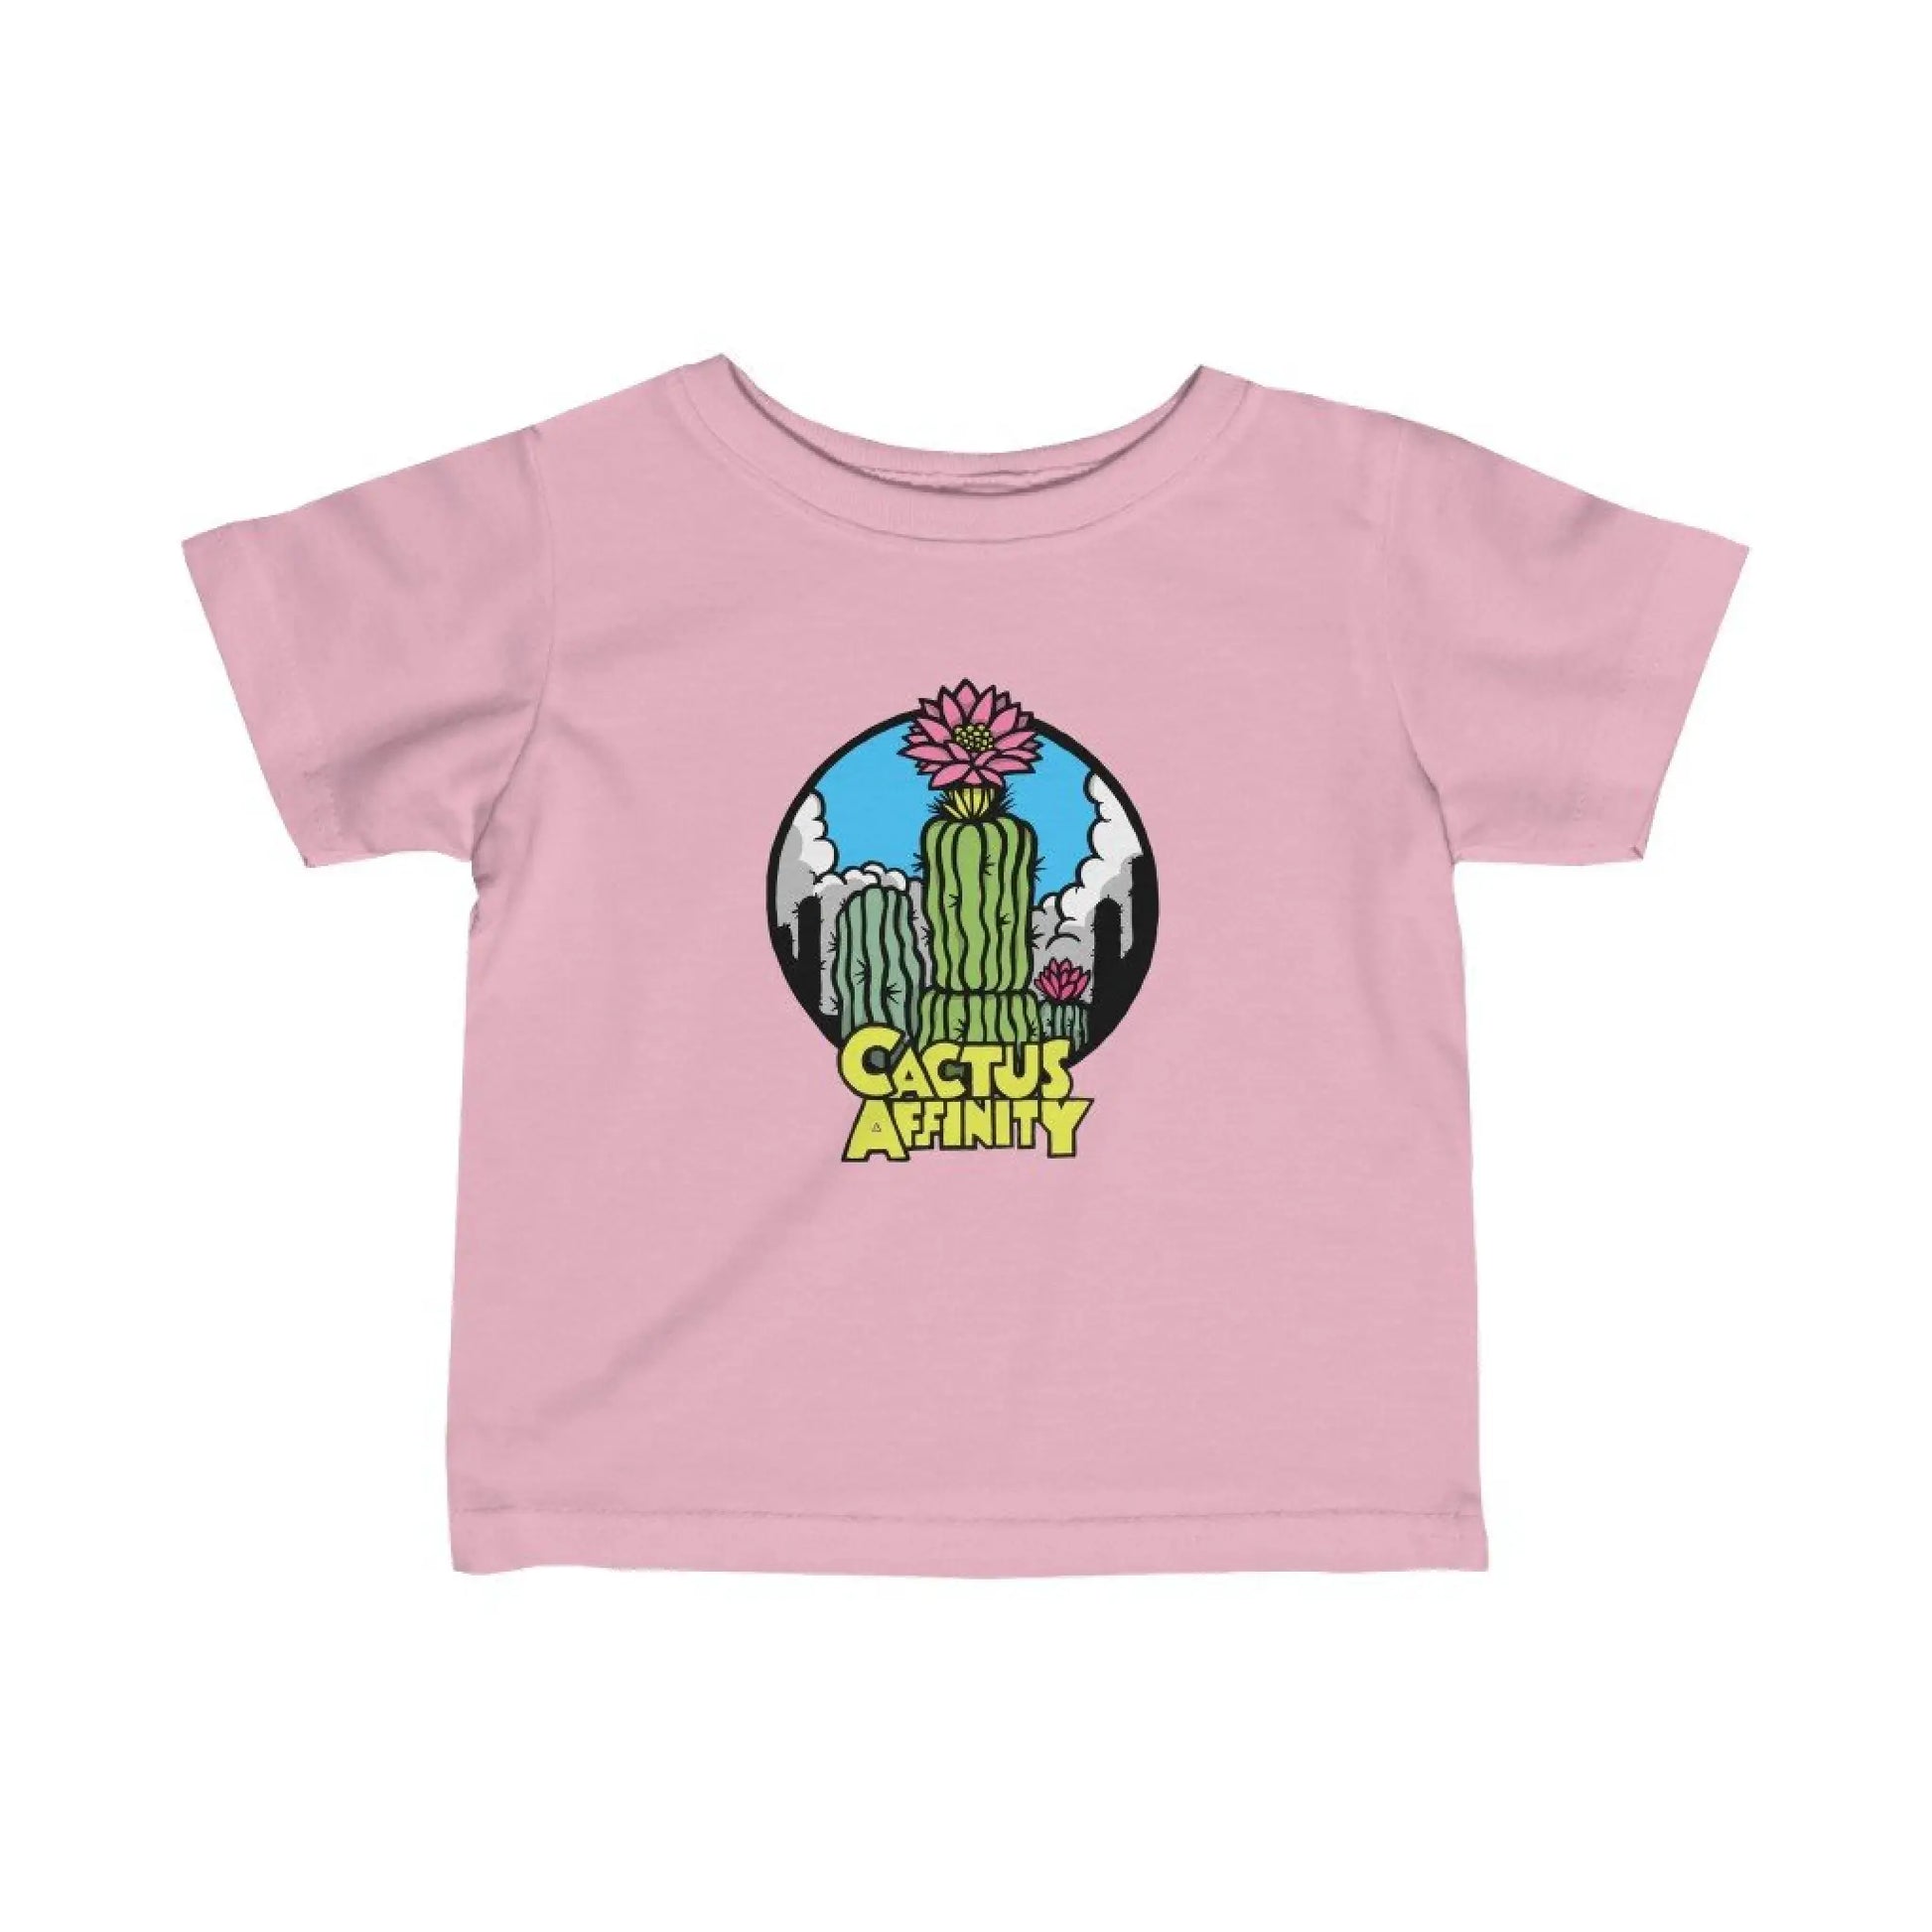 Infant Tee - Logo - Pink / 18M - Kids clothes